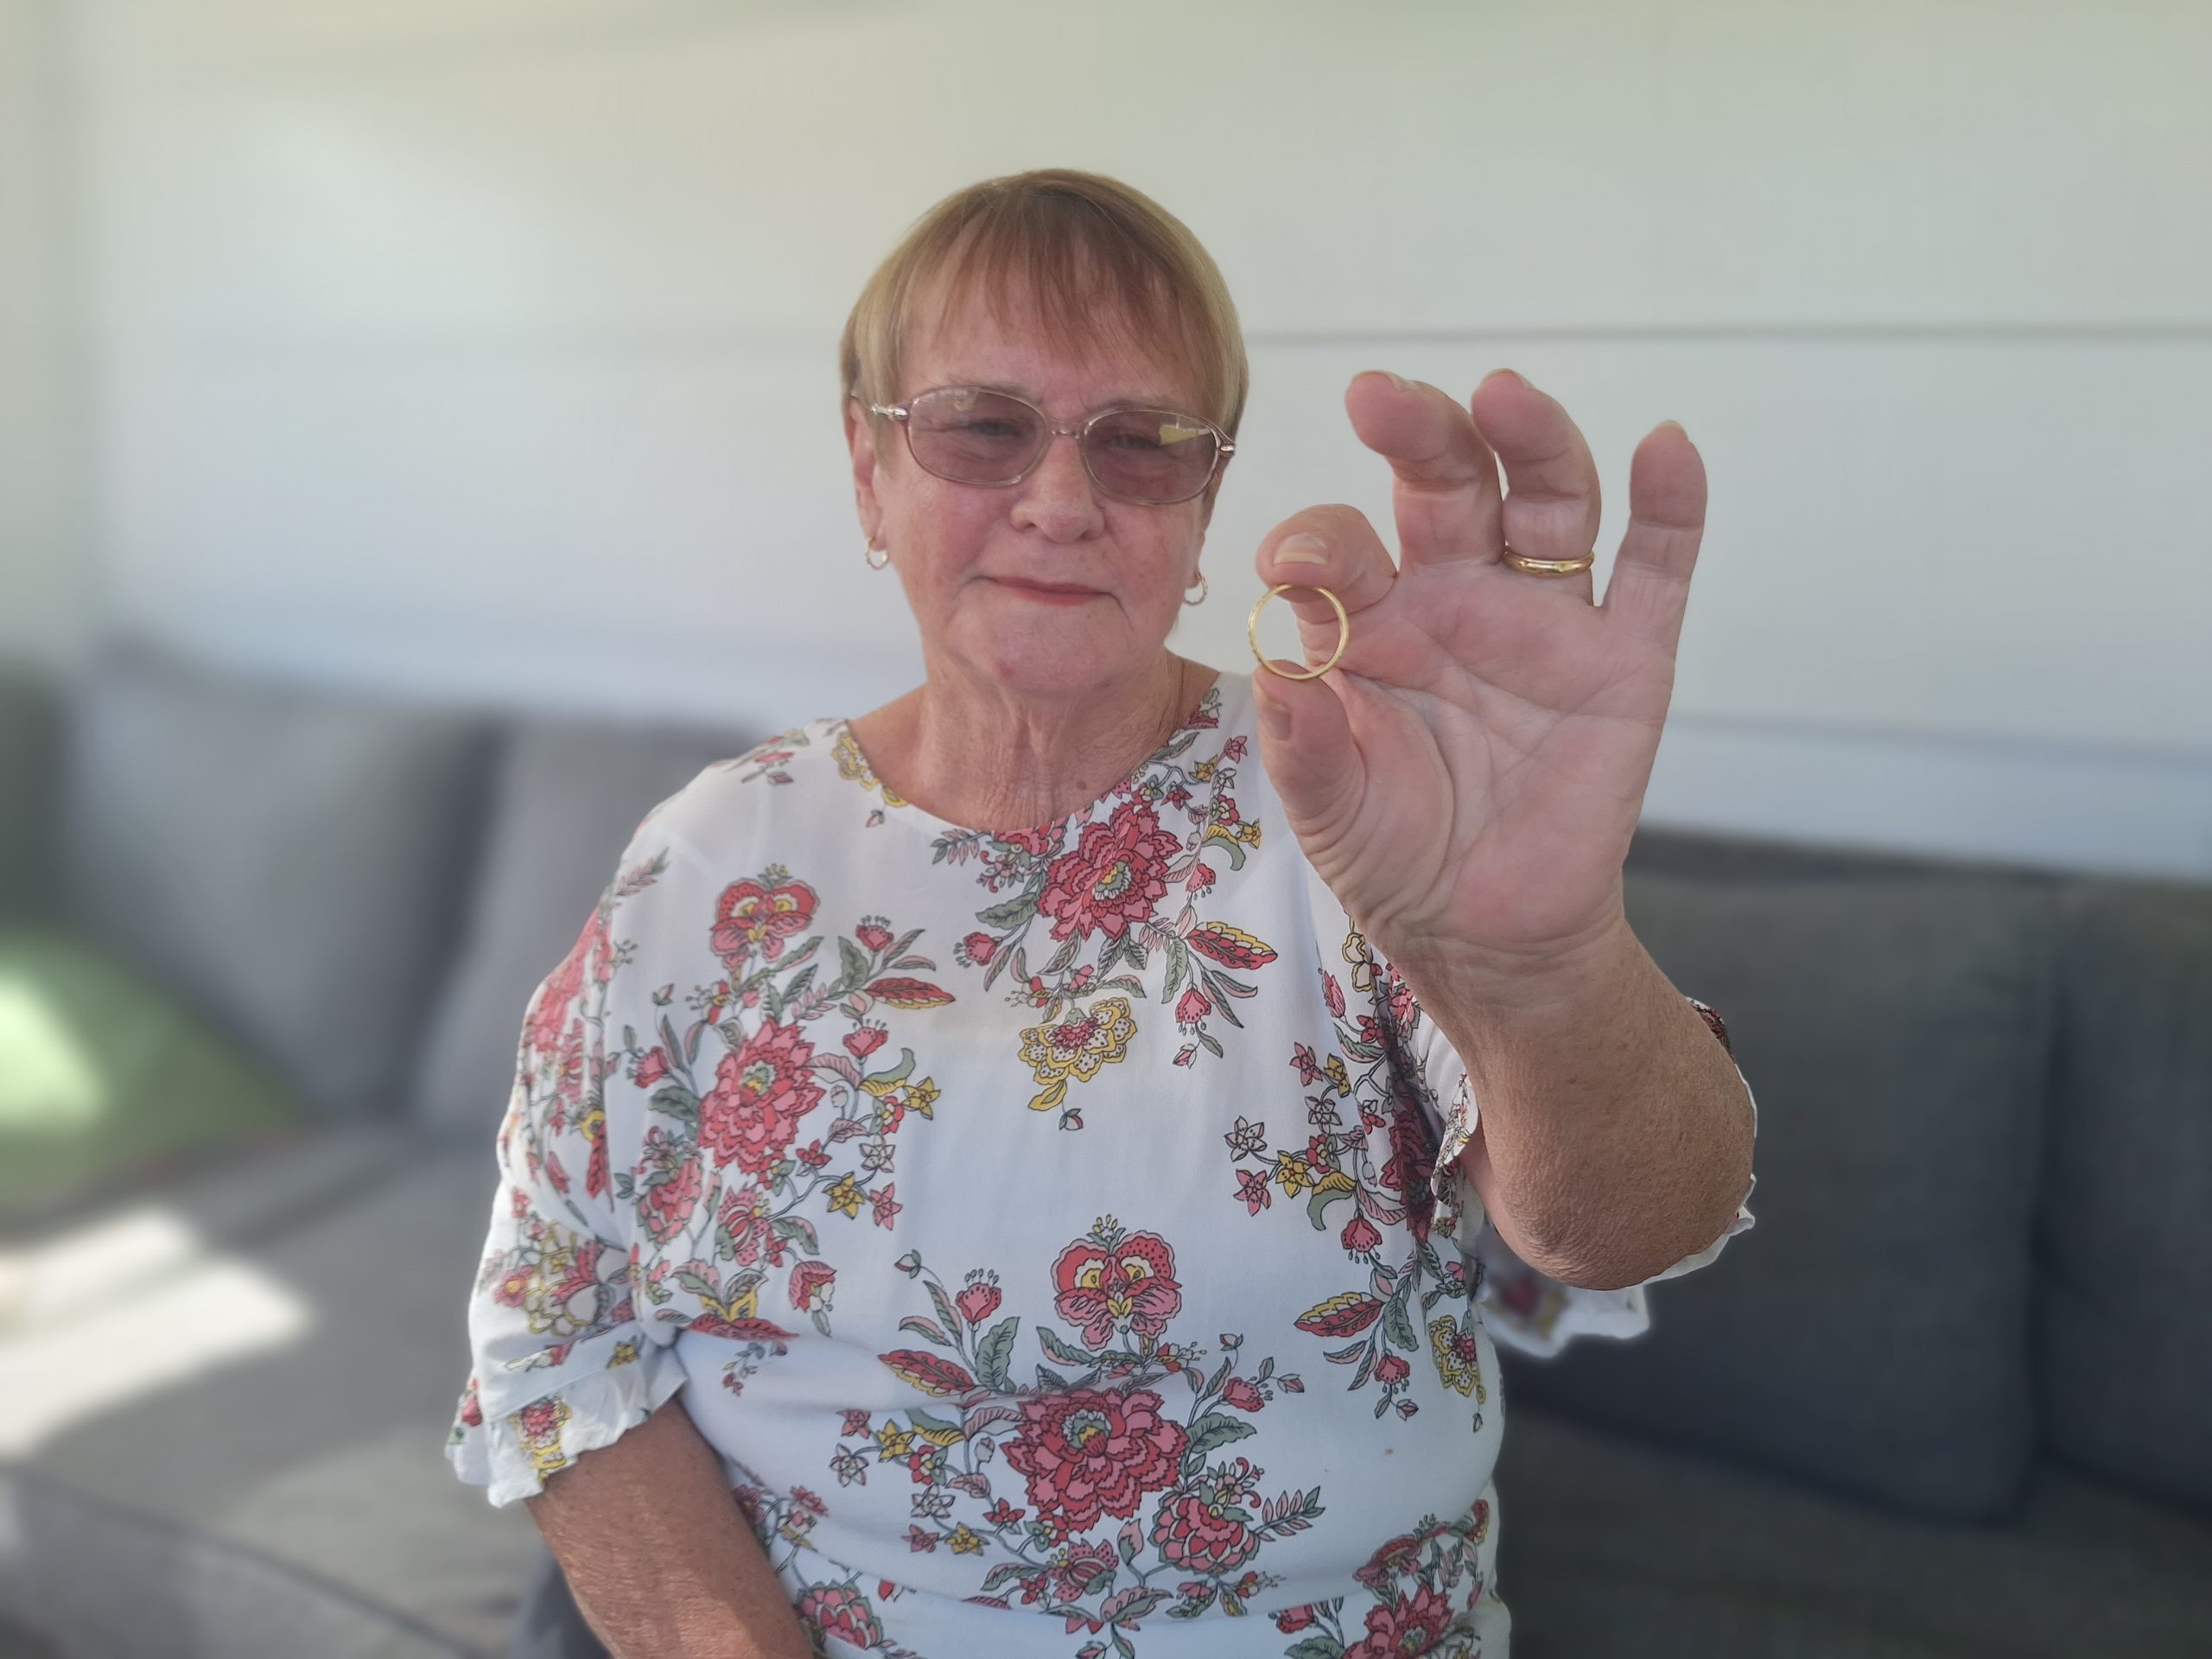 Boy finds ring missing for 65 years - Greymouth Star